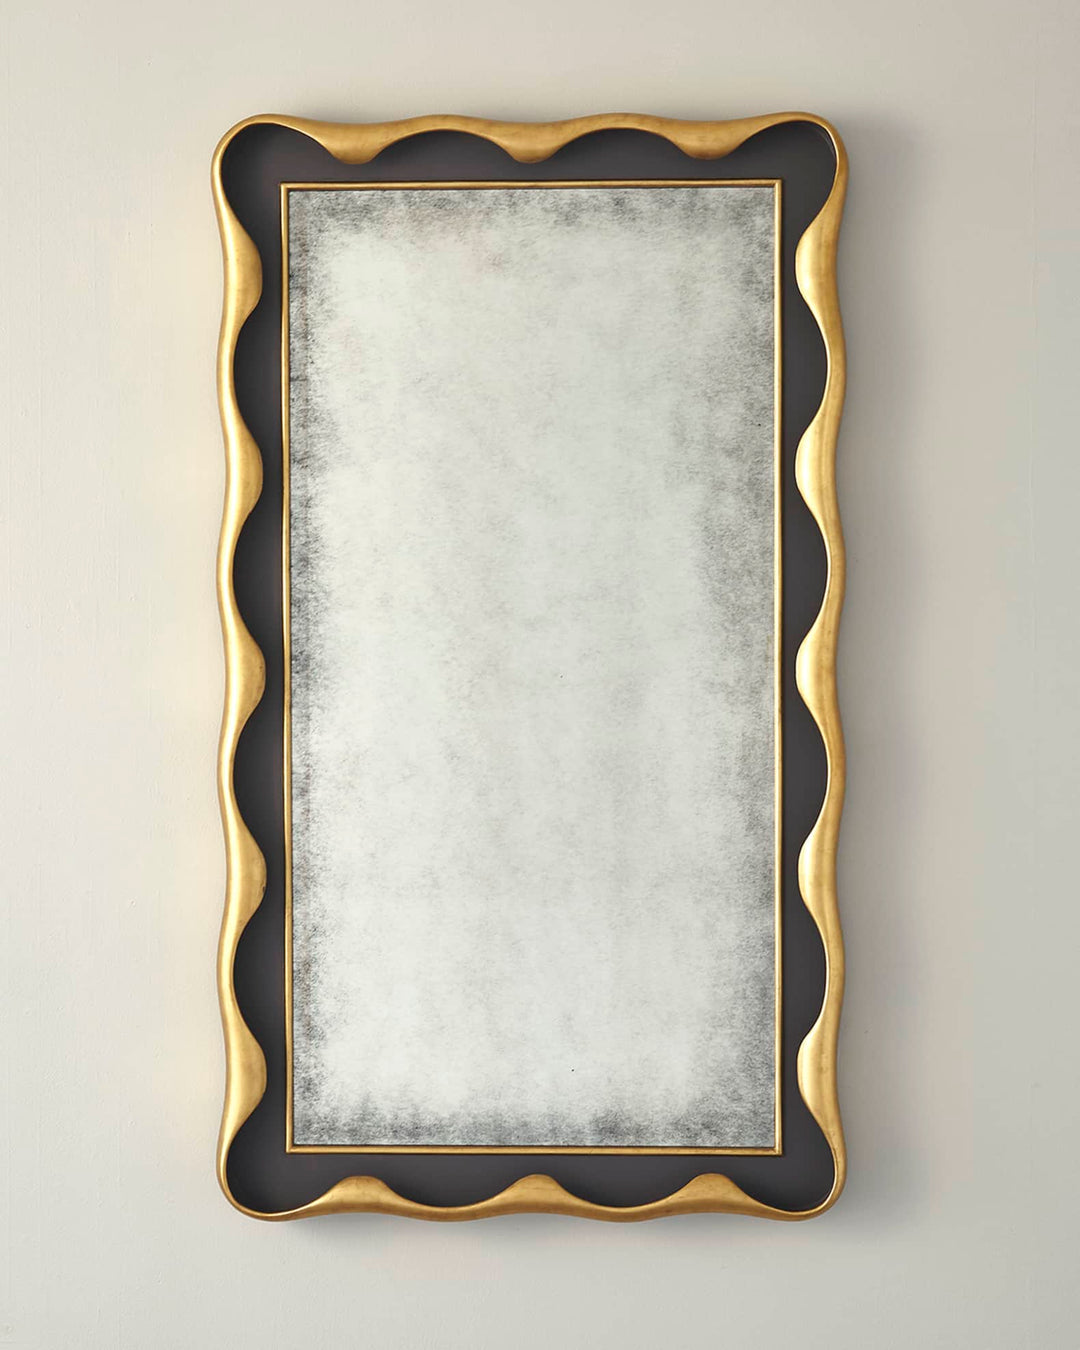 Venus Mirror - Available in 2 Colors